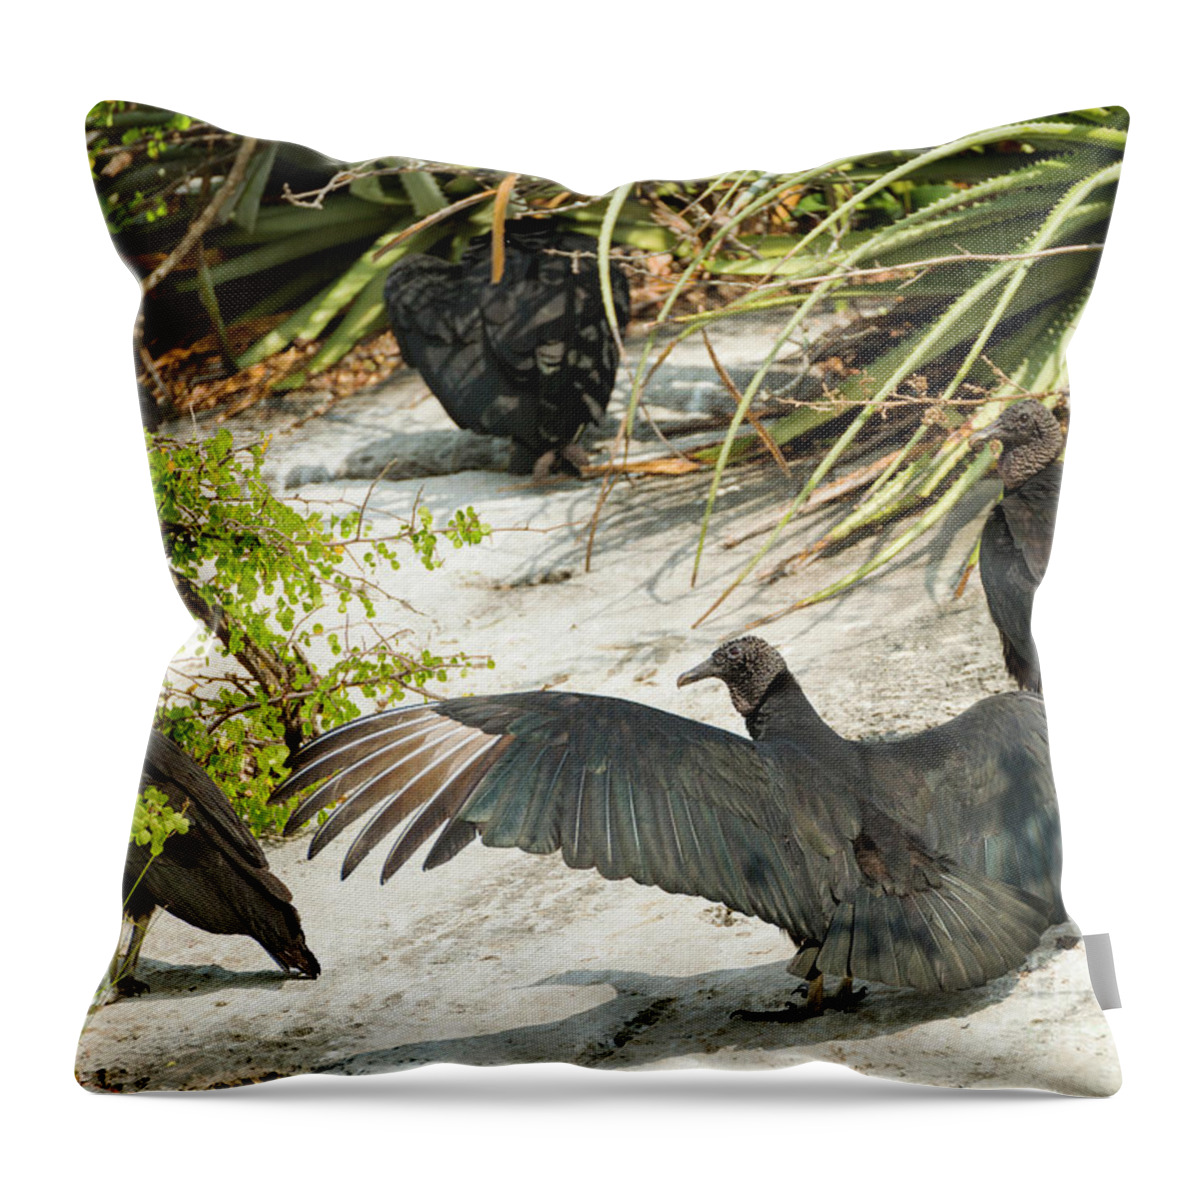 Vulture Throw Pillow featuring the photograph Black Buzzard By Grijalva River In Mexico by THP Creative